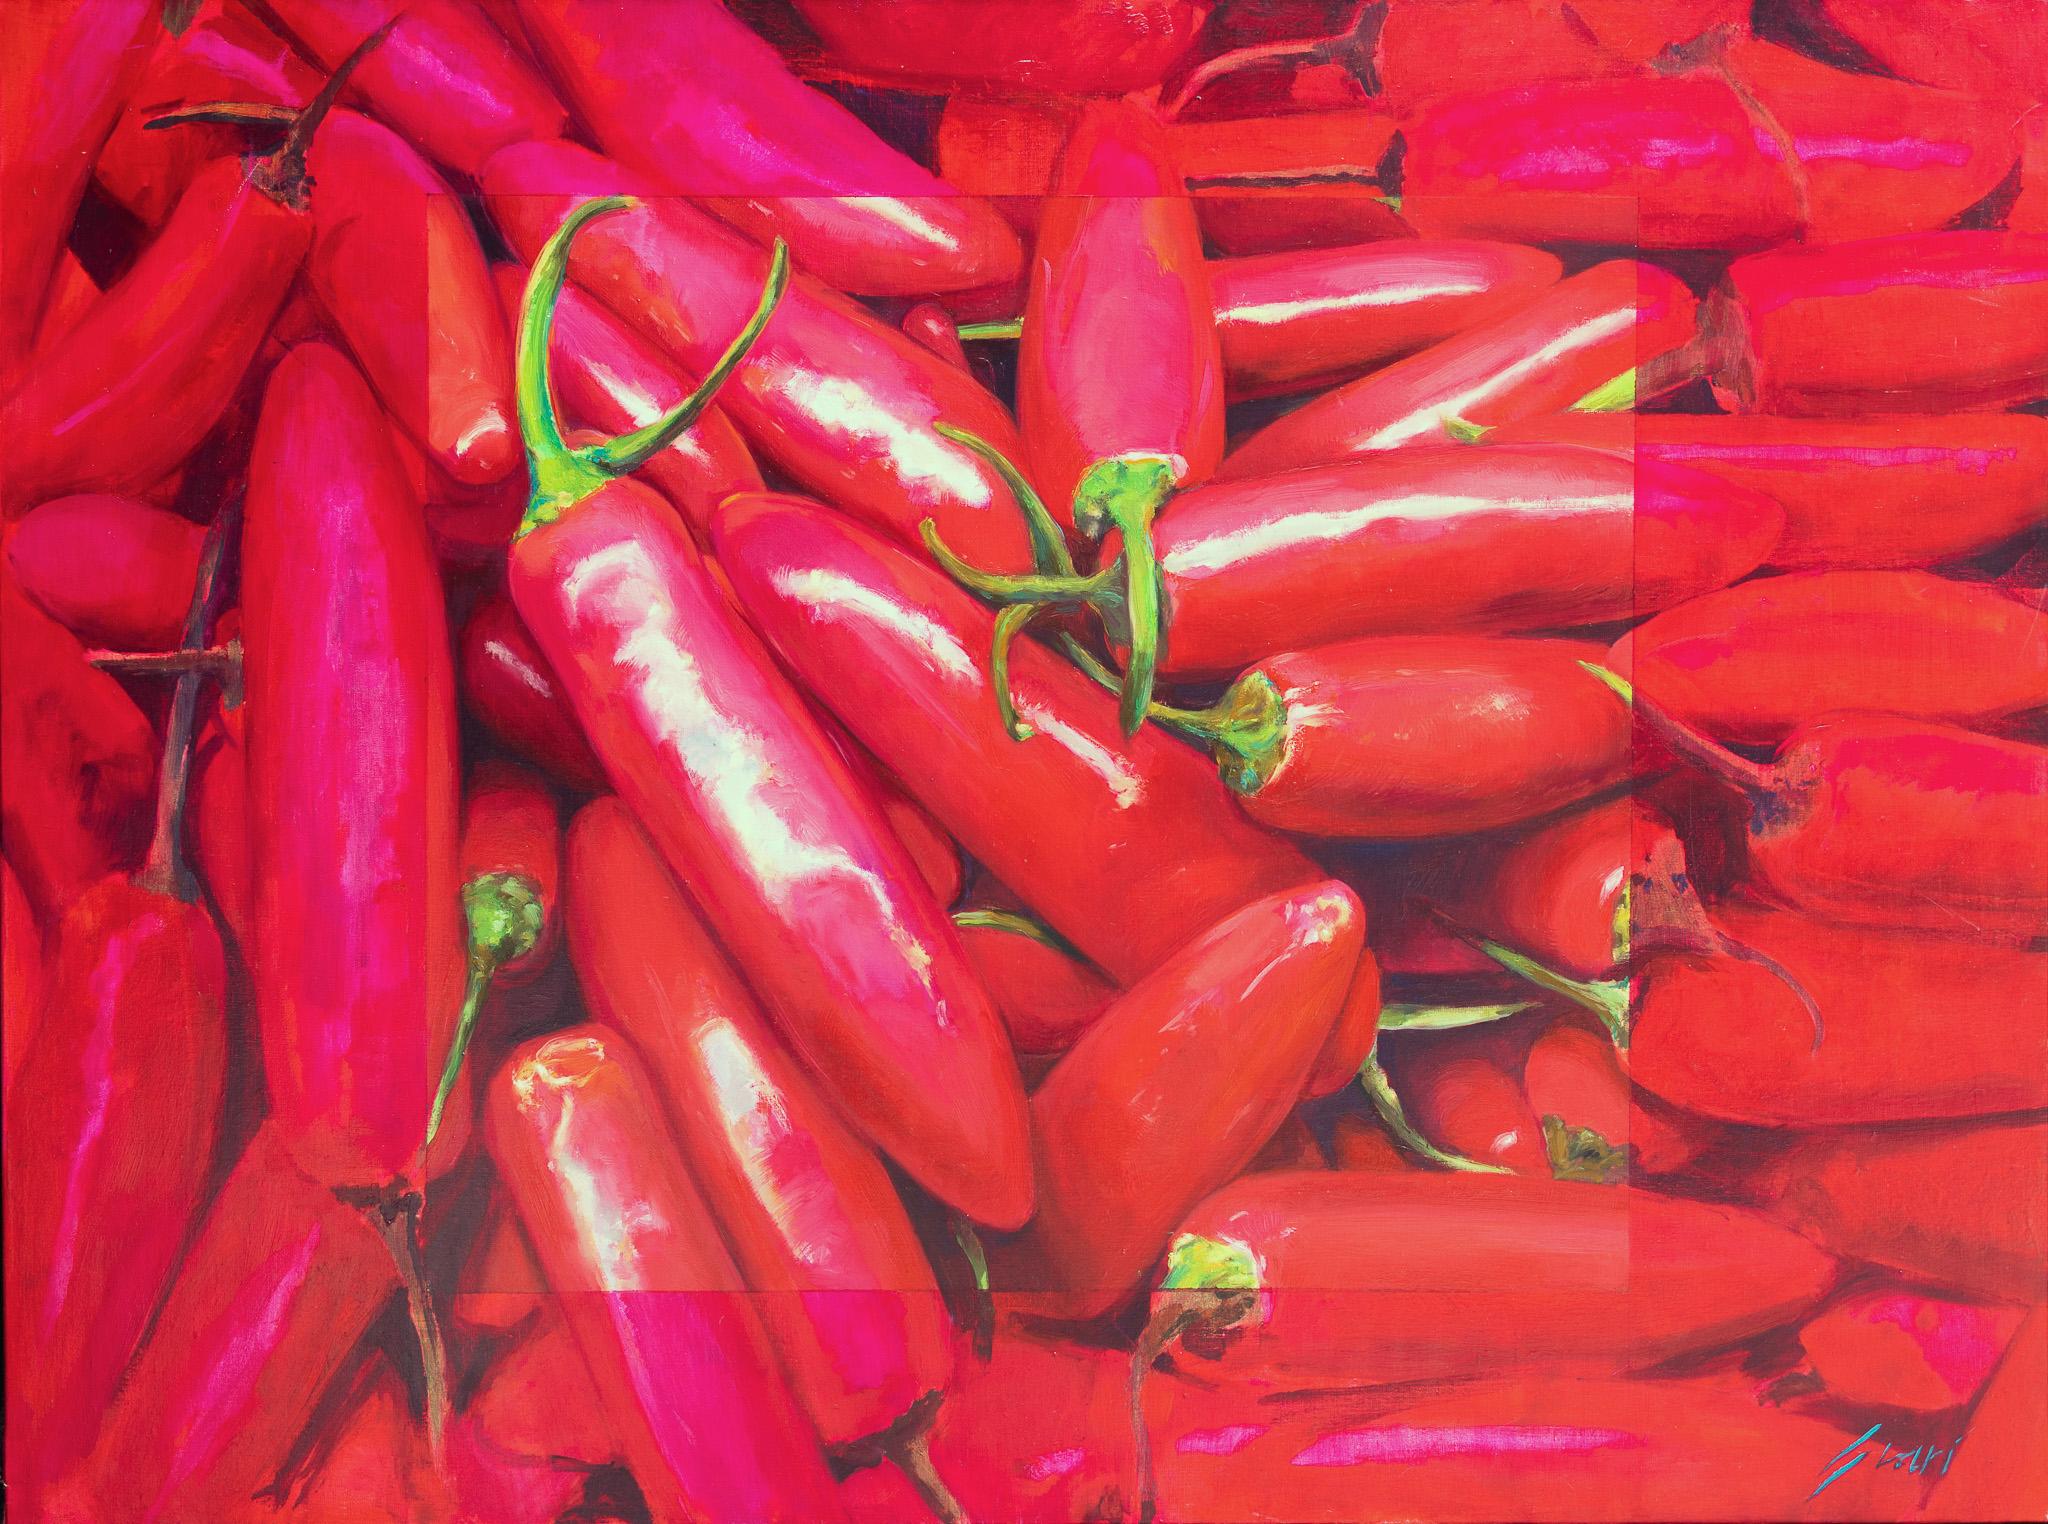 Pep Suari Still-Life Painting - "Hot Chilis" Large Acrylic Painting with Rectangular Abstraction